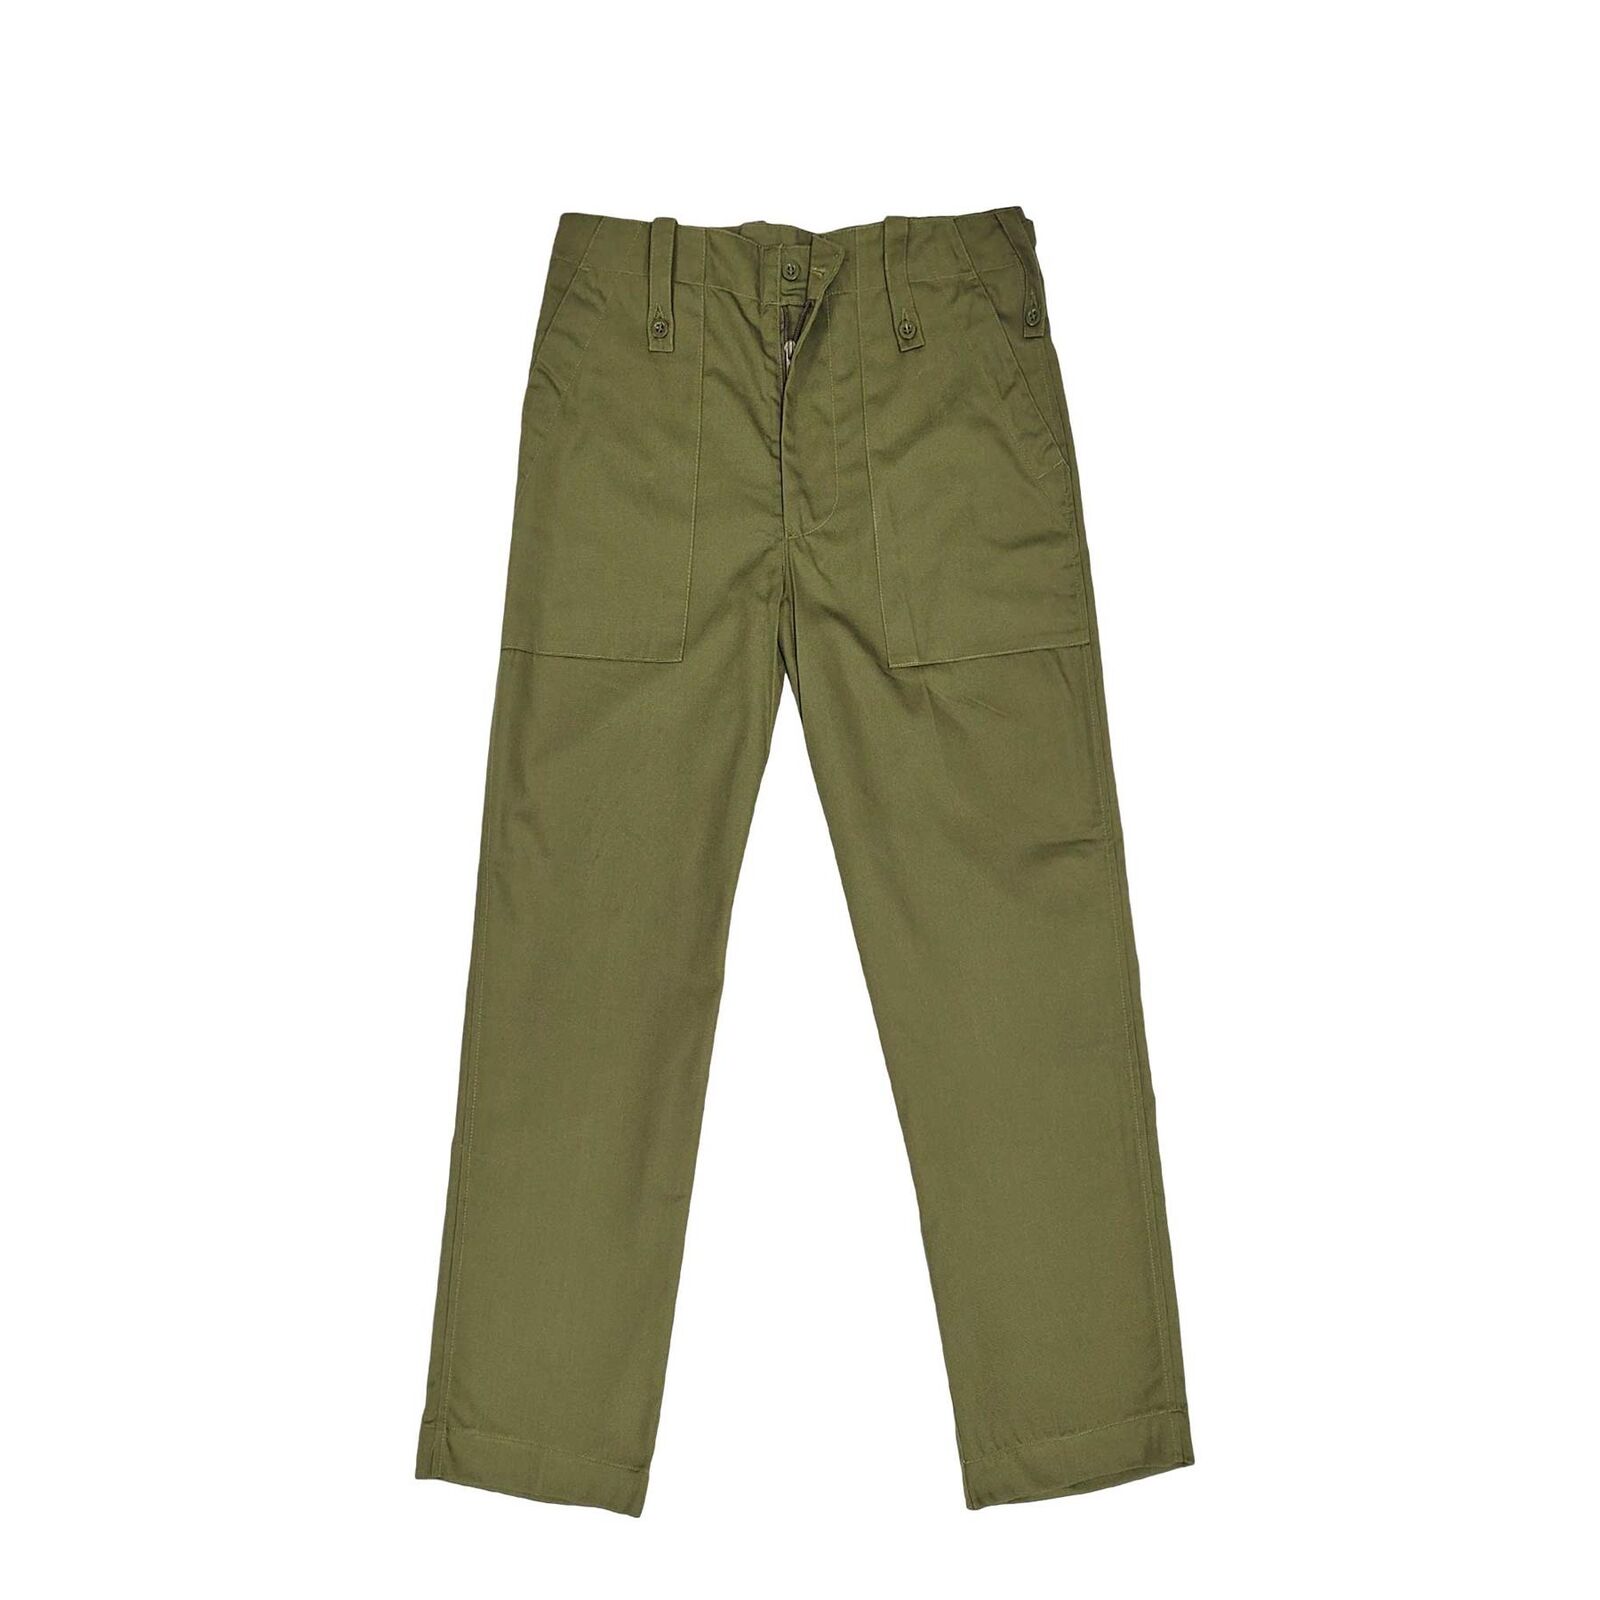 Genuine British Military Light Weight Trouser Combat Outdoor Pant Olive New